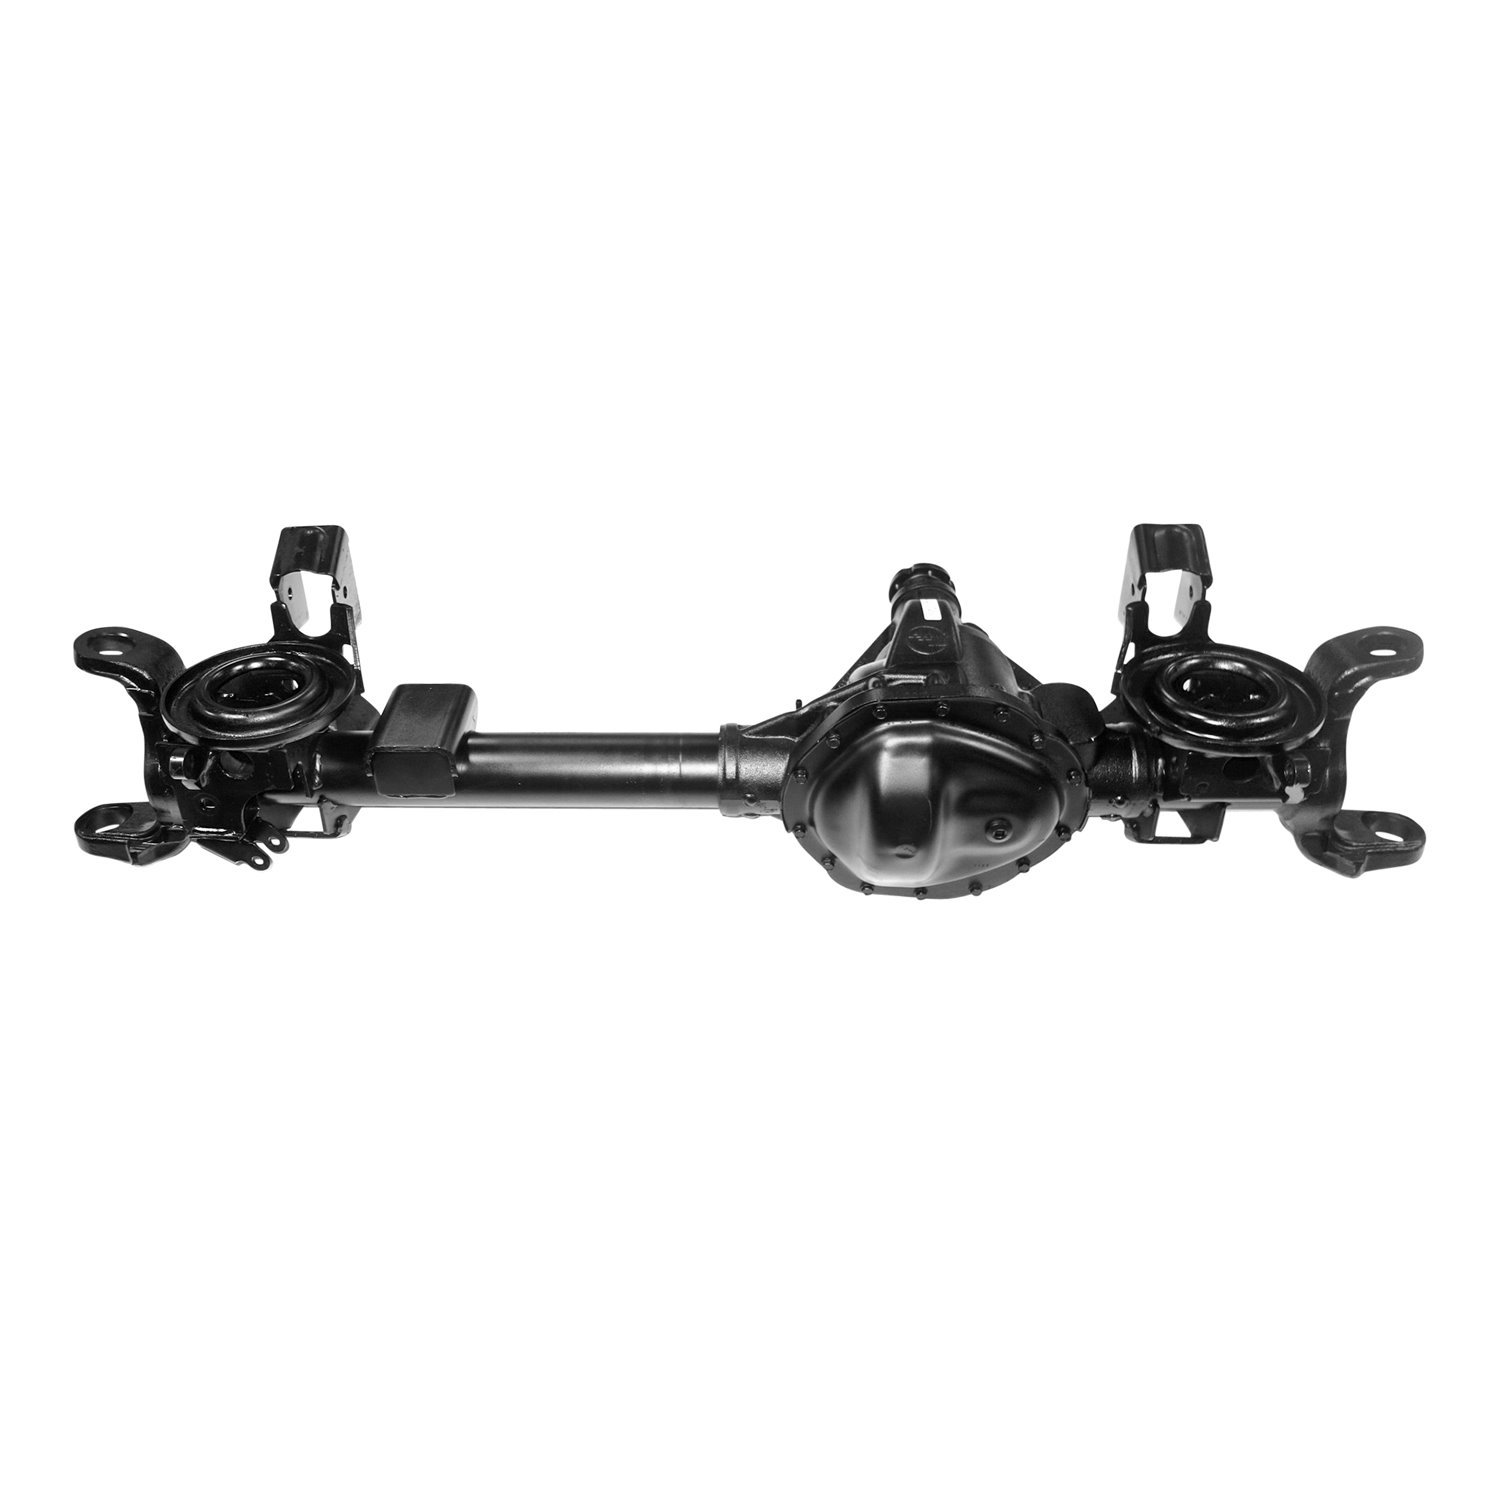 Remanufactured Front Axle Assy 9.25" 2012-2013 Ram 2500 & 3500 3.42 ,